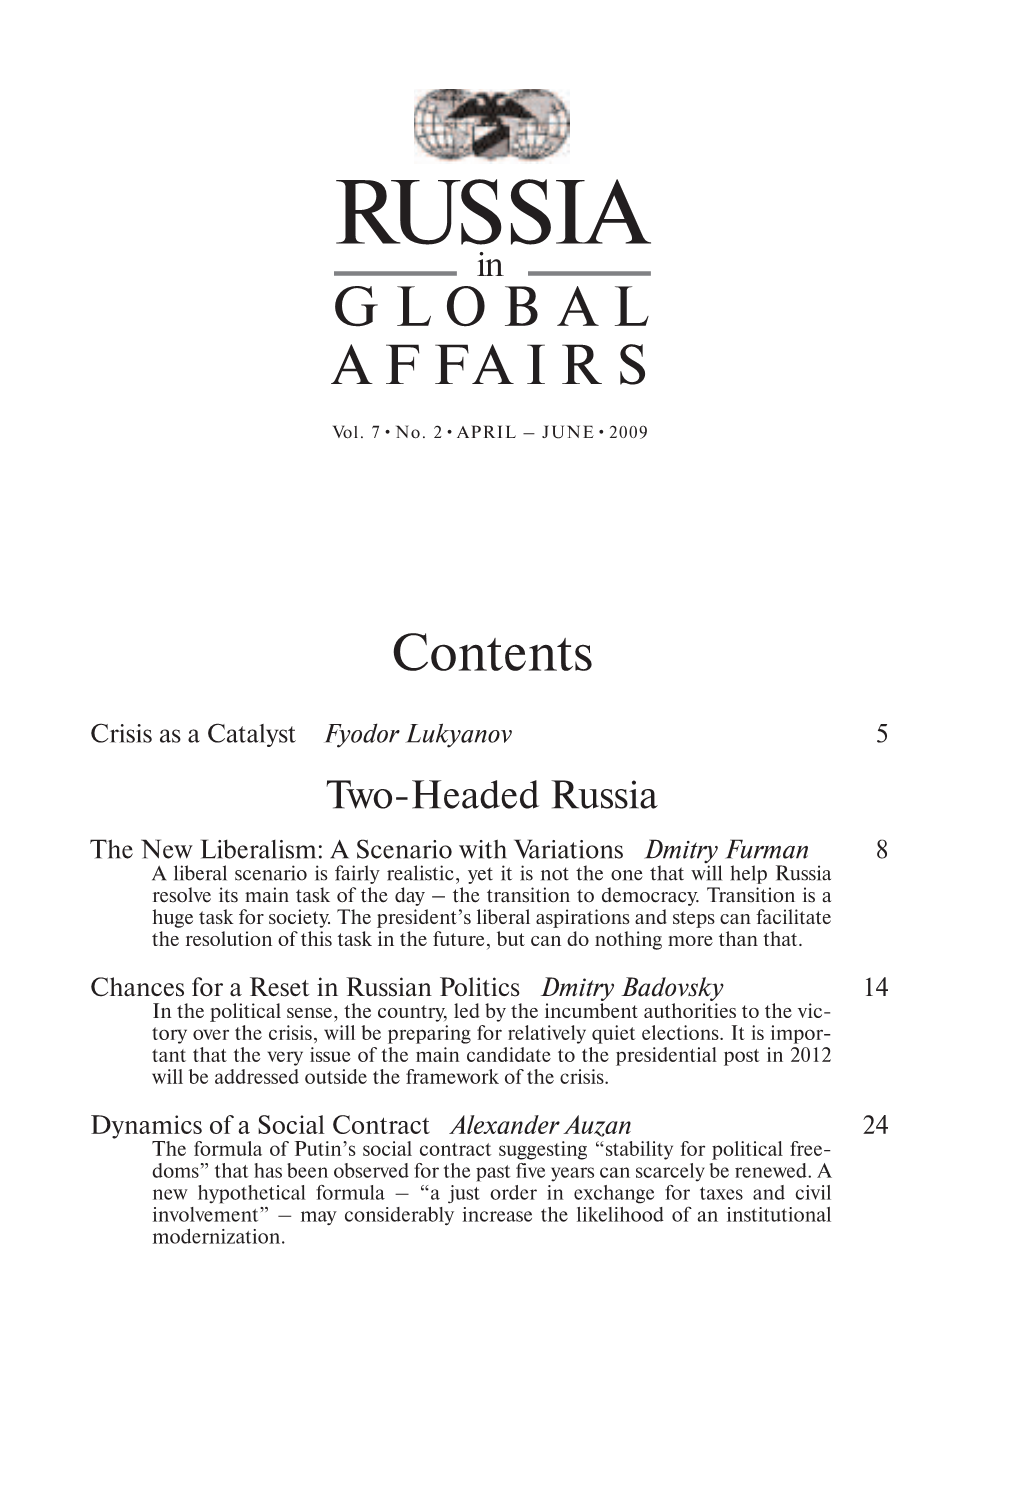 Russia in Global Affairs April